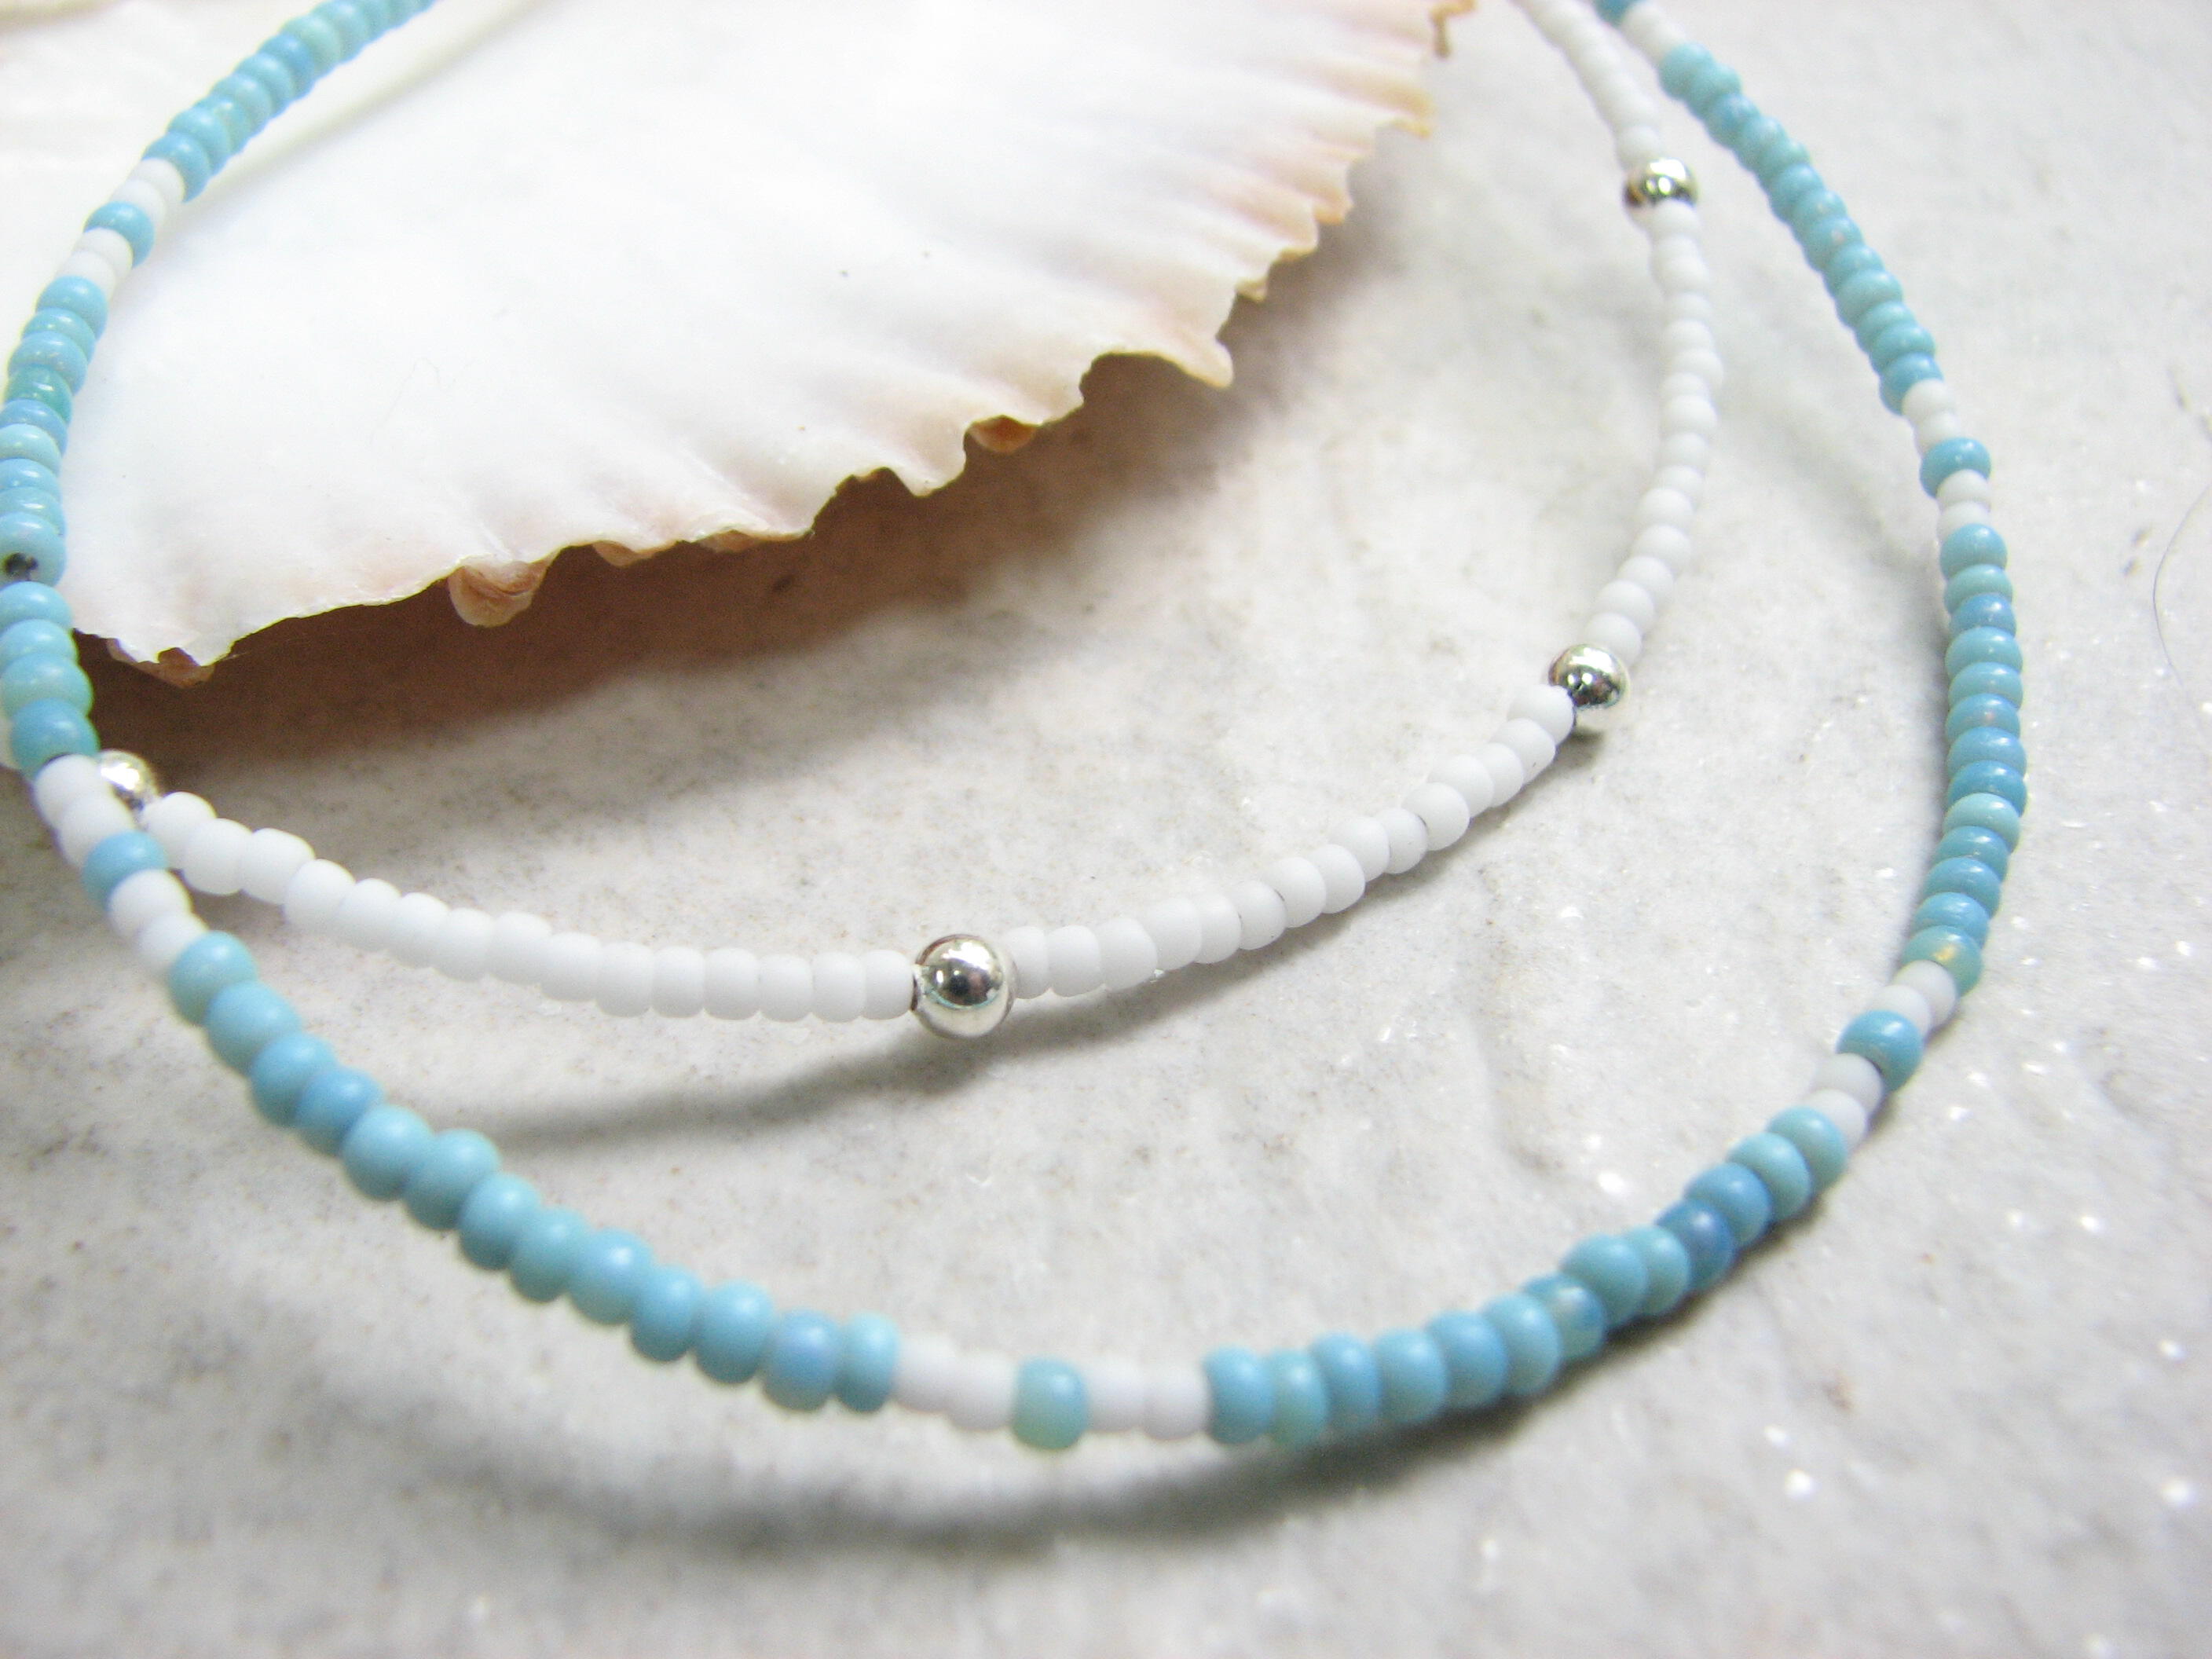 Summer Anklets in turquoise or white